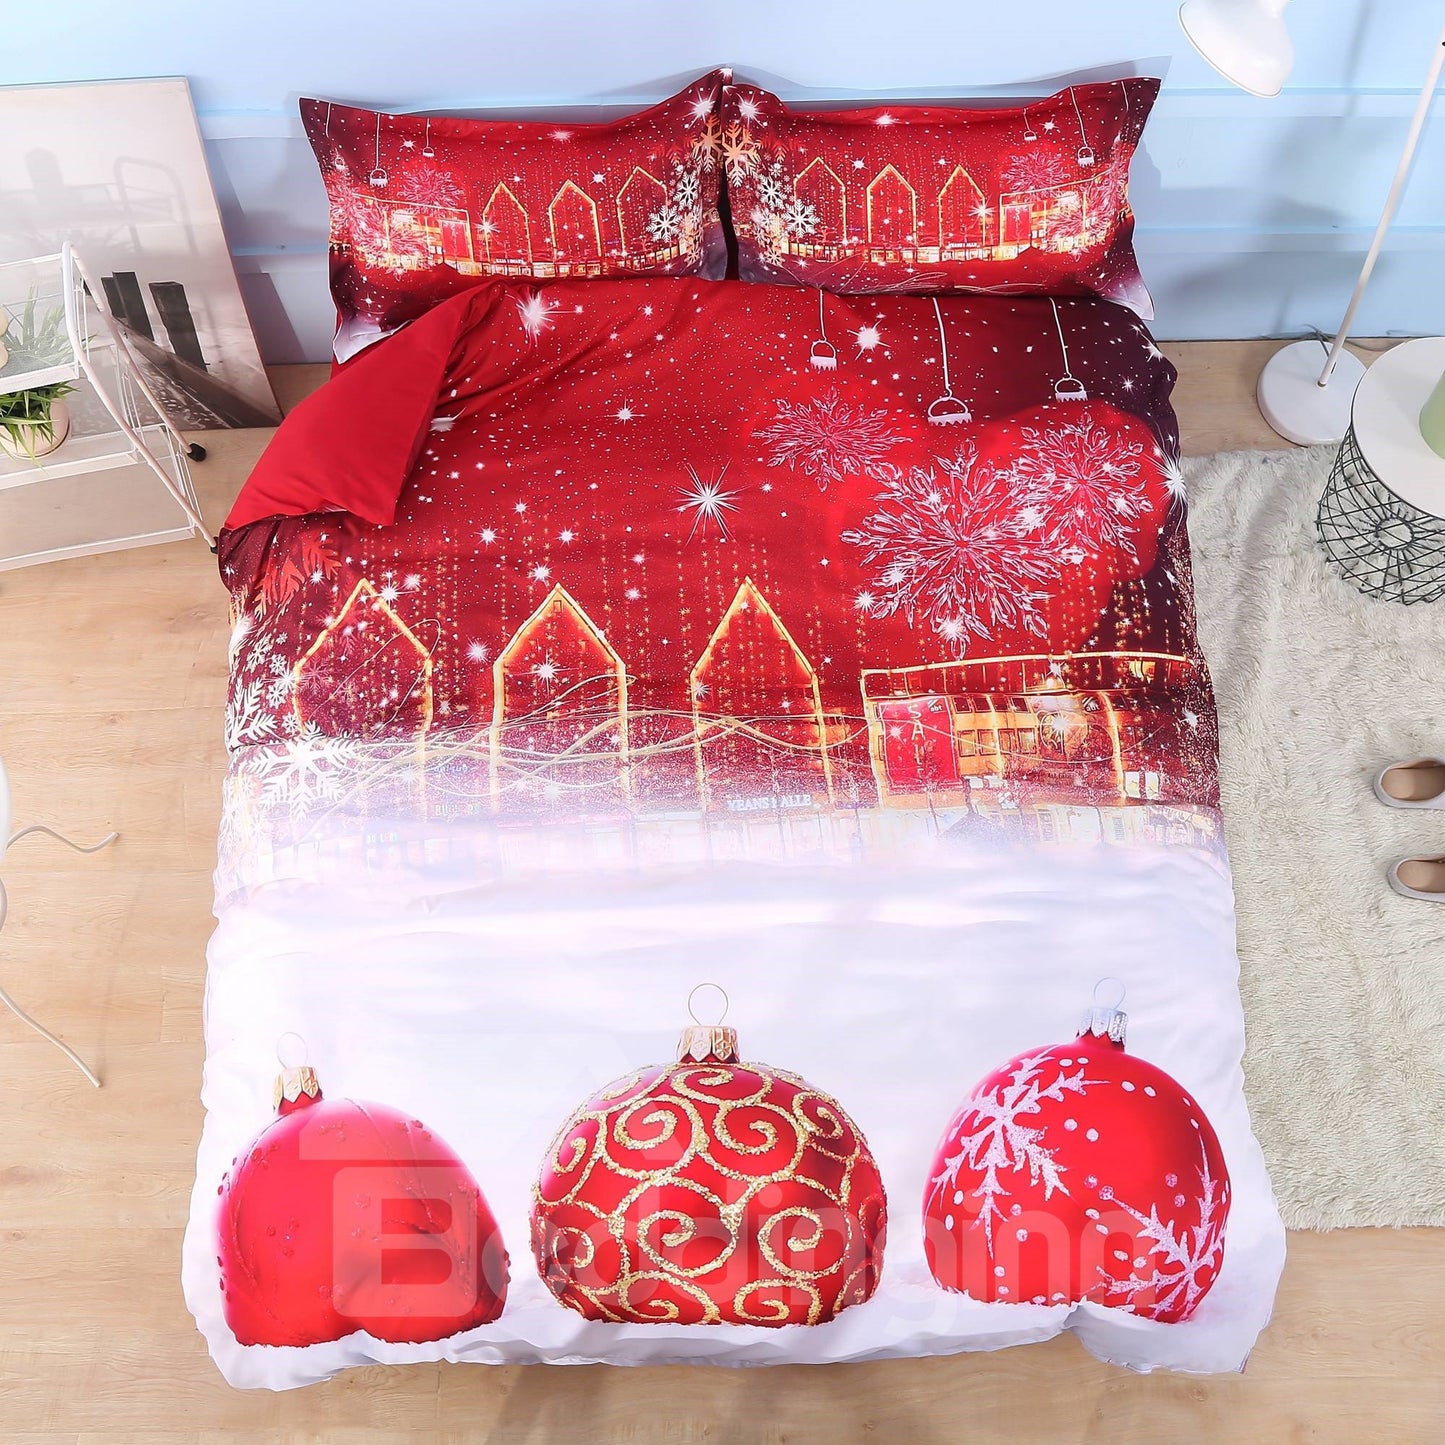 Red Christmas Ball Ornaments 3D Printed 4-Piece Polyester Bedding Sets Duvet Covers Colorfast Wear-resistant Endurable S (King)